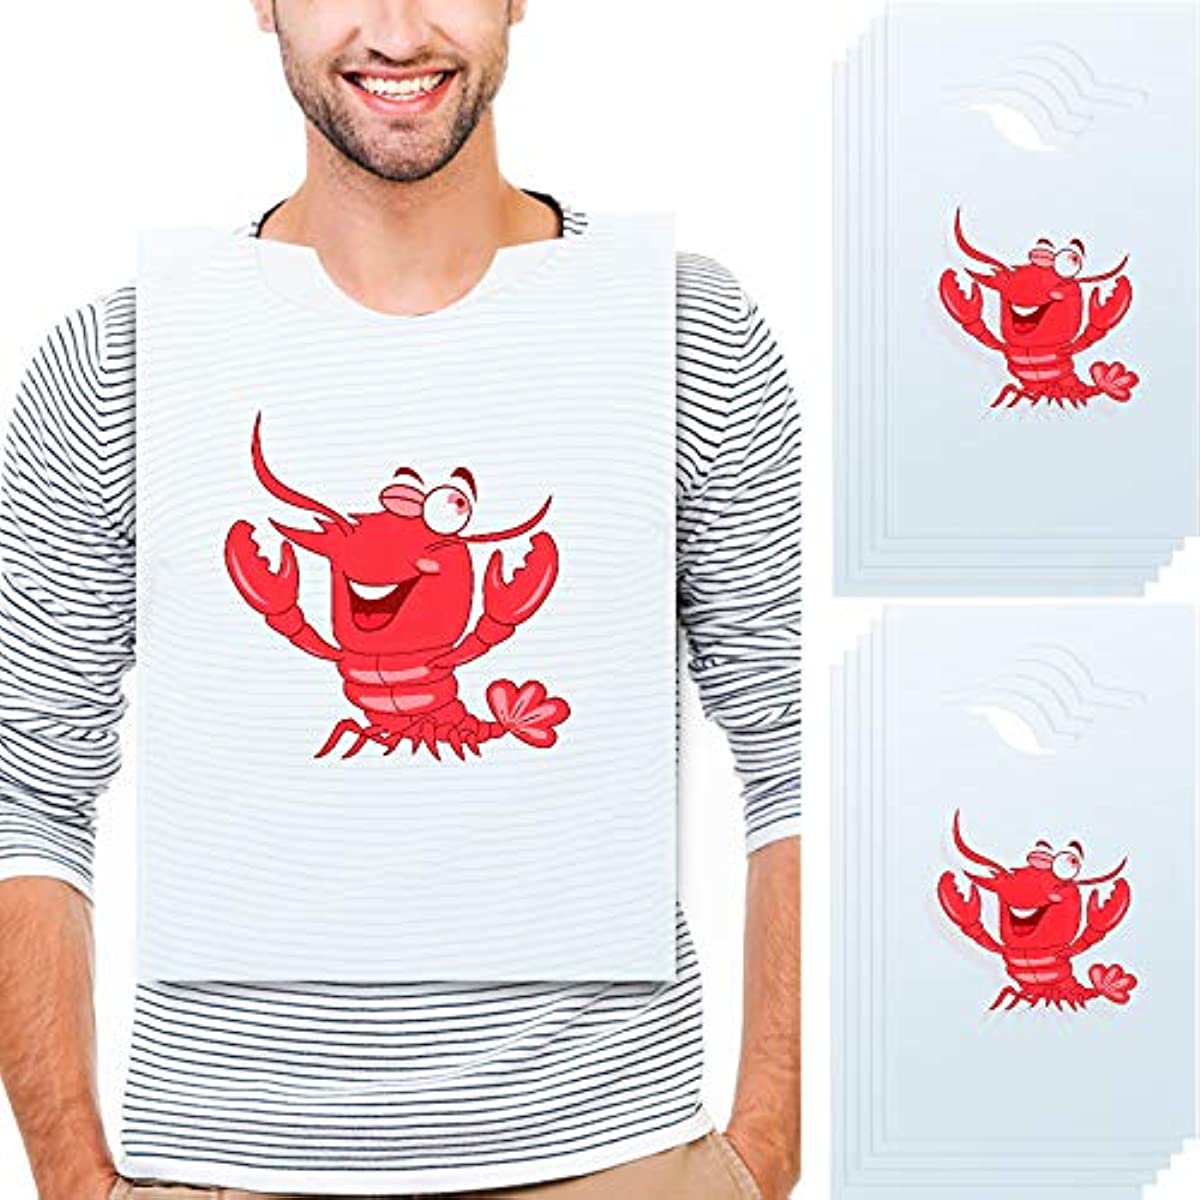 30 Piece Lobster Bibs 23 Inch Crawfish Boil Party Supplies Crab Plastic Seafood Funny Bibs for Adult Size